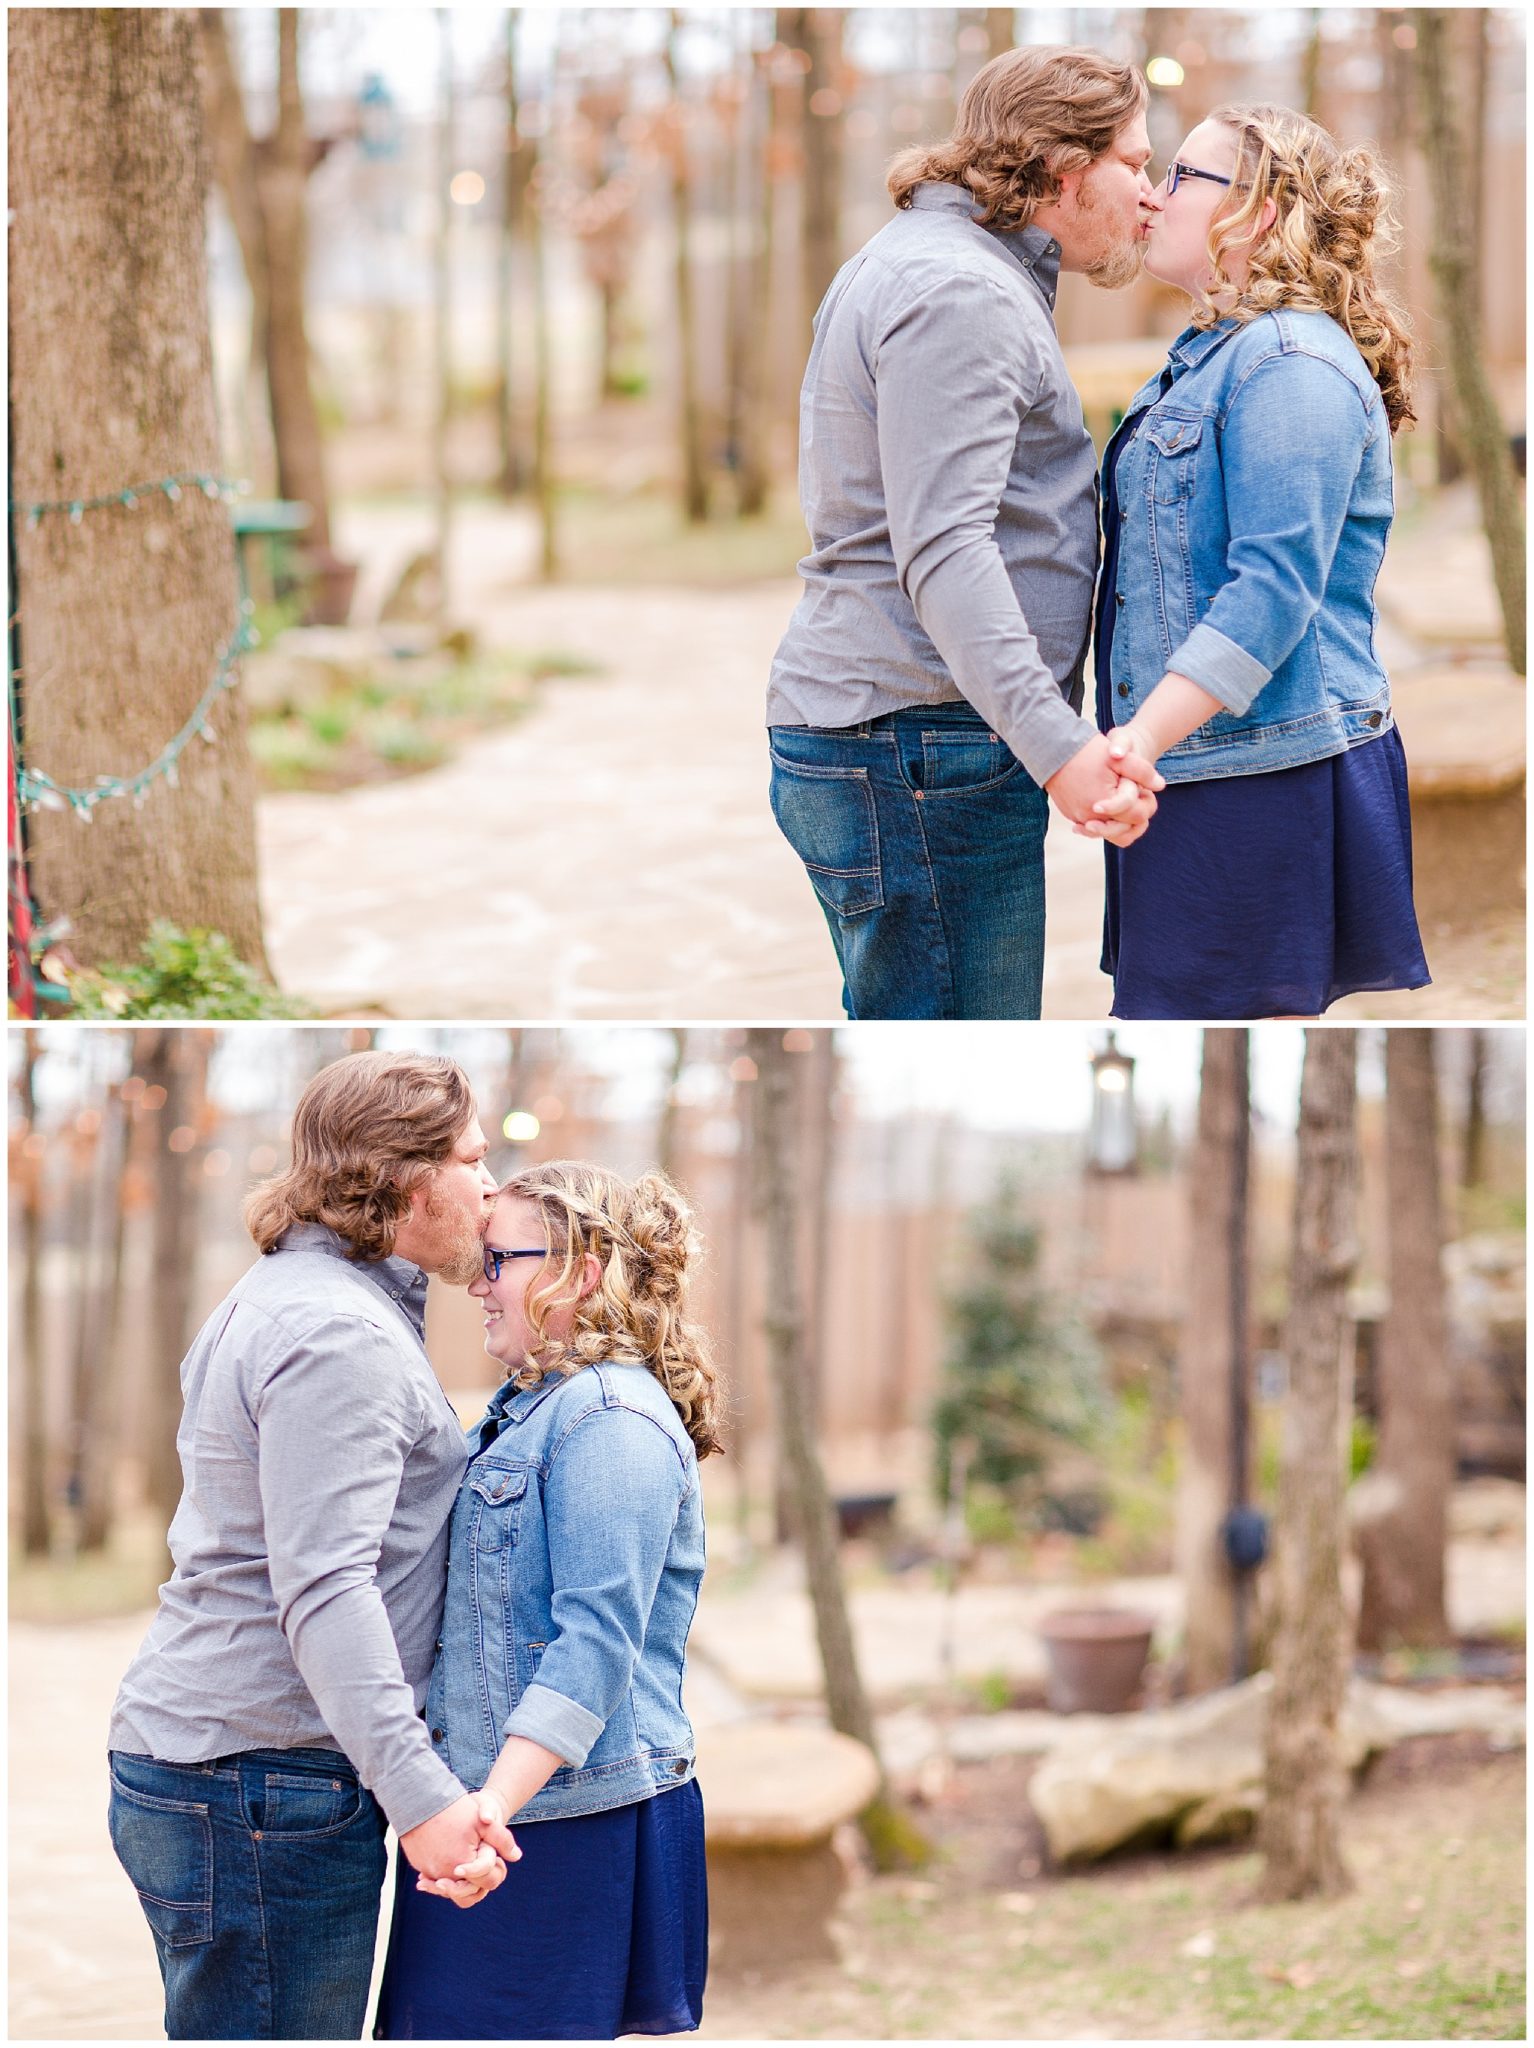 Lauren and Caleb's engagement session